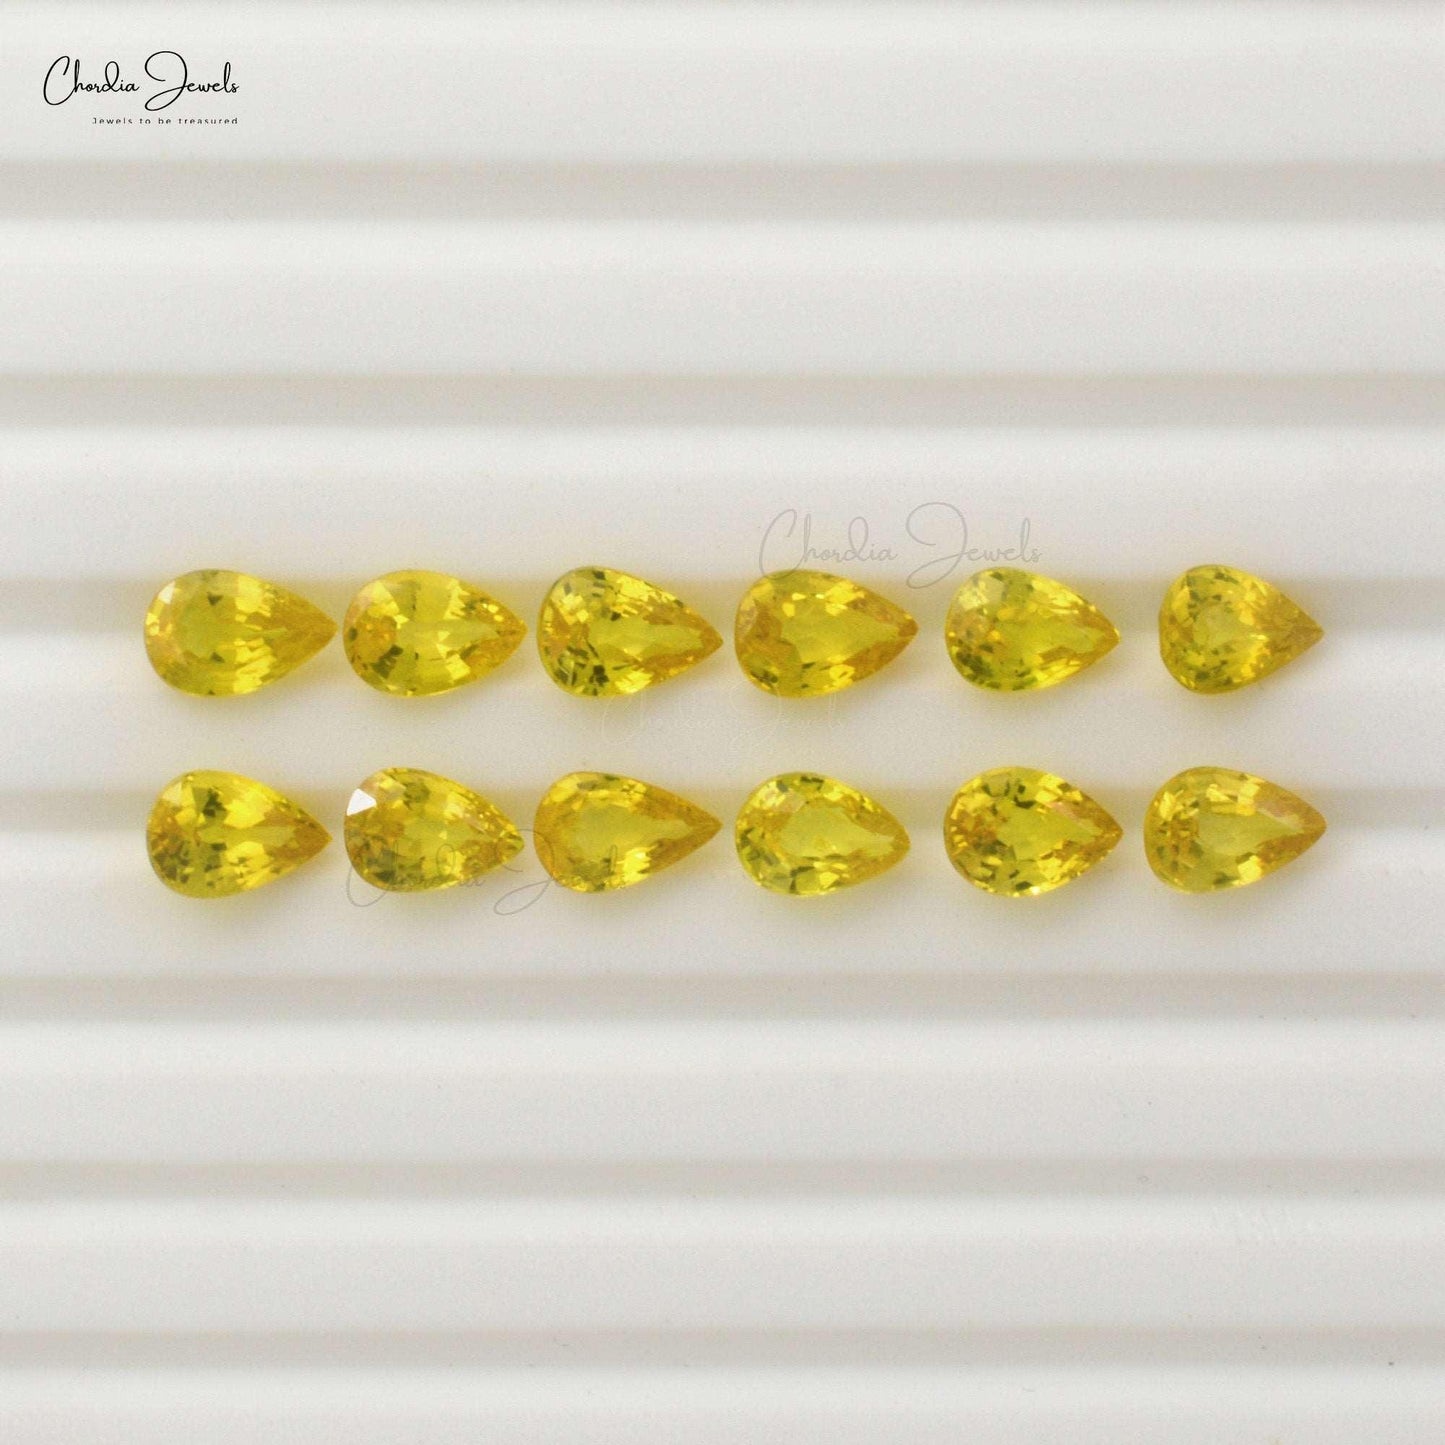 AAA Grade Yellow Sapphire 7x5 MM Pear Cut Loose Gemstones for Earrings. Weight: 1 Carat, Stone Cut: Excellent, Precious Gemstones from Chordia Jewels.